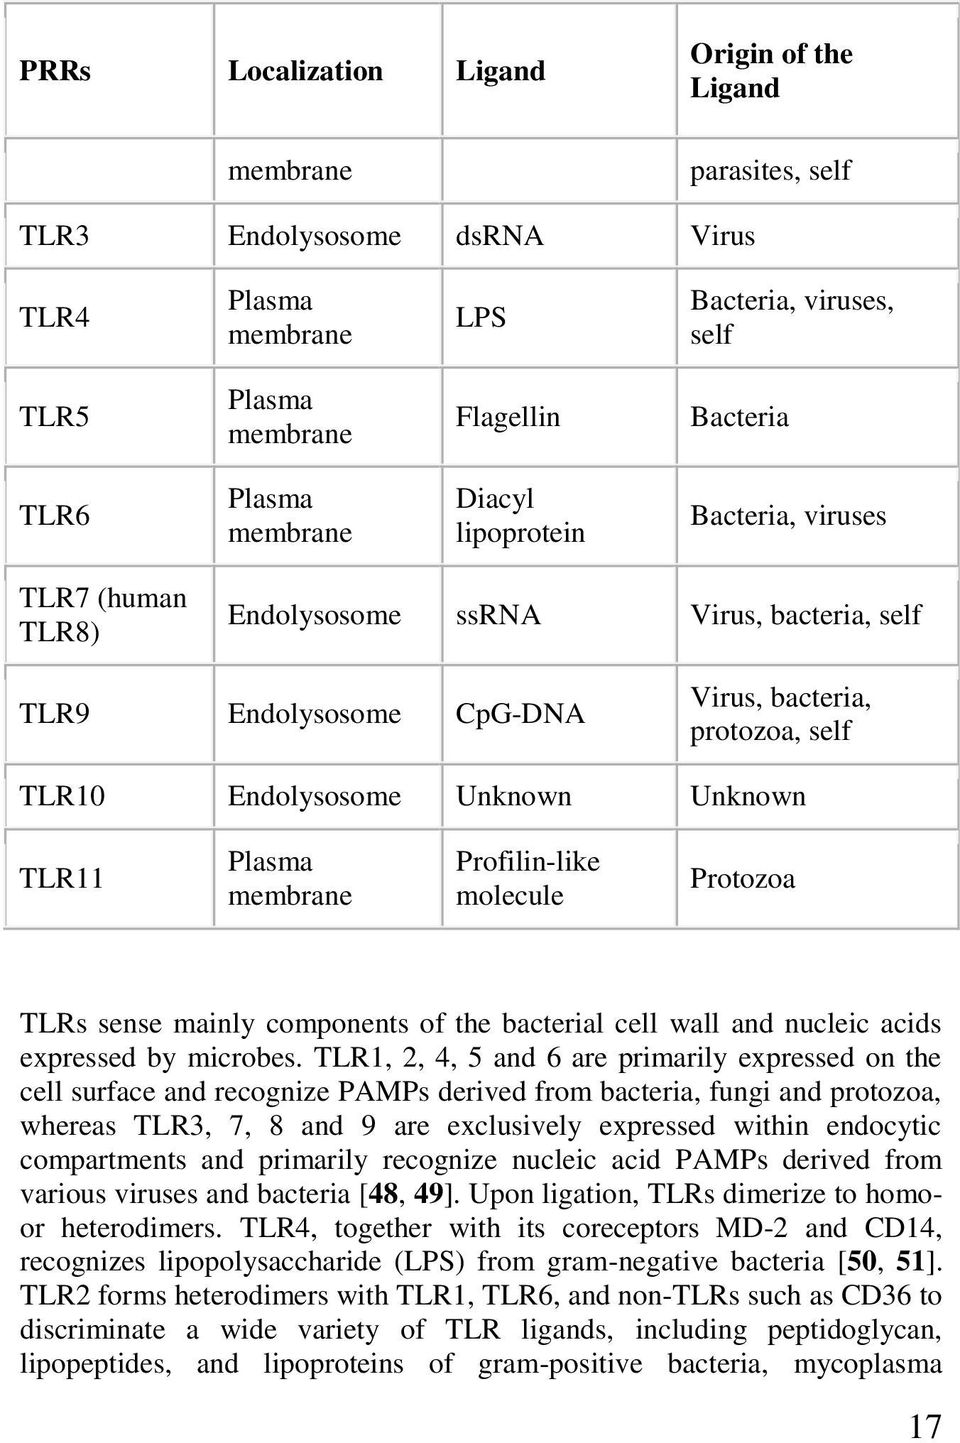 Unknown TLR11 Plasma membrane Profilin-like molecule Protozoa TLRs sense mainly components of the bacterial cell wall and nucleic acids expressed by microbes.